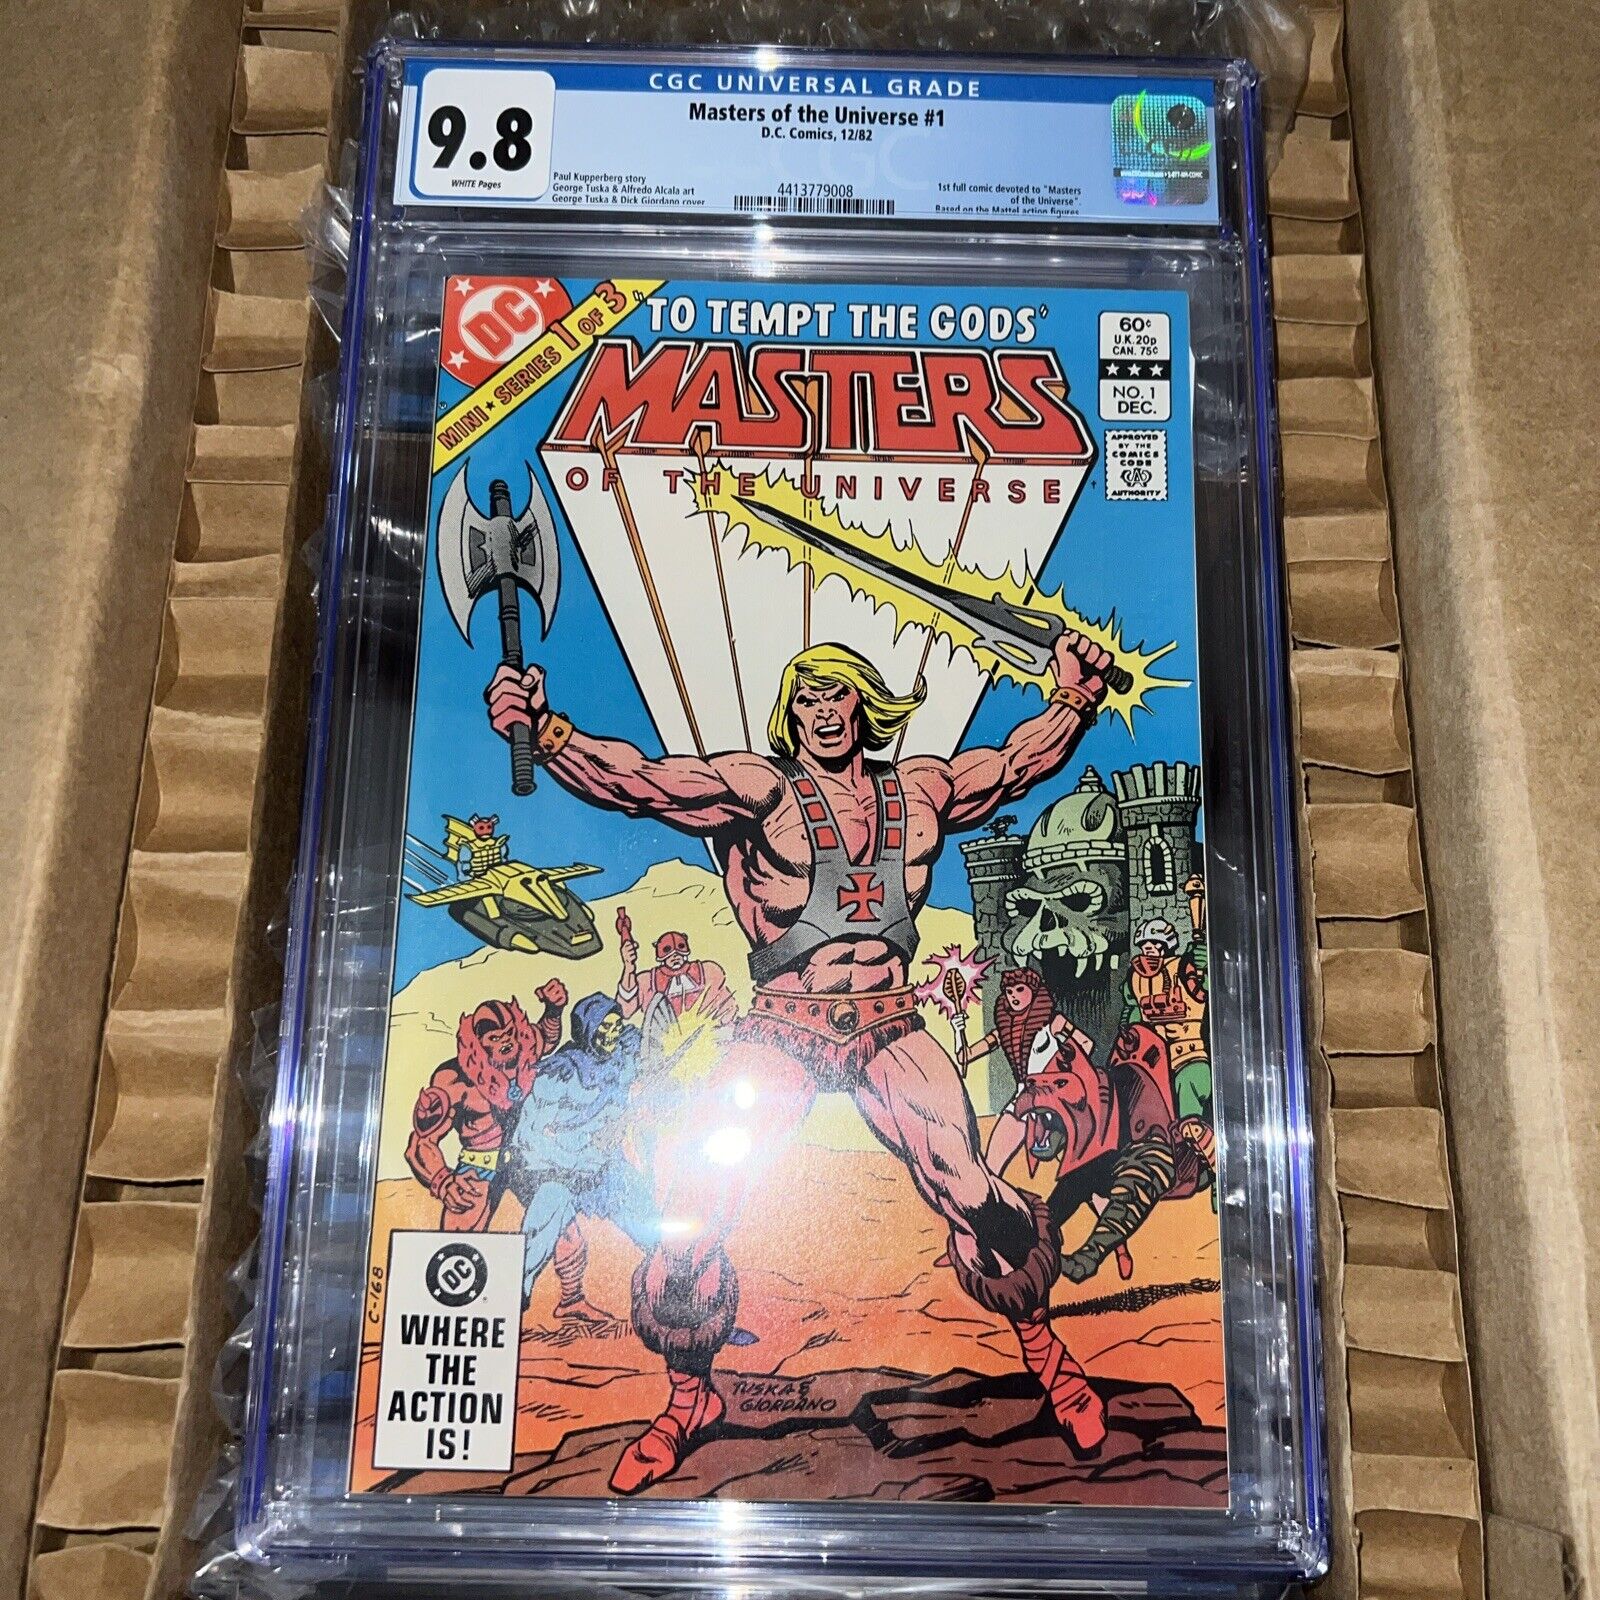 HE-MAN ~ MASTERS OF THE UNIVERSE #1 ~ CGC 9.8 WP ~ 1ST HE-MAN SKELTOR ~ DC 1982